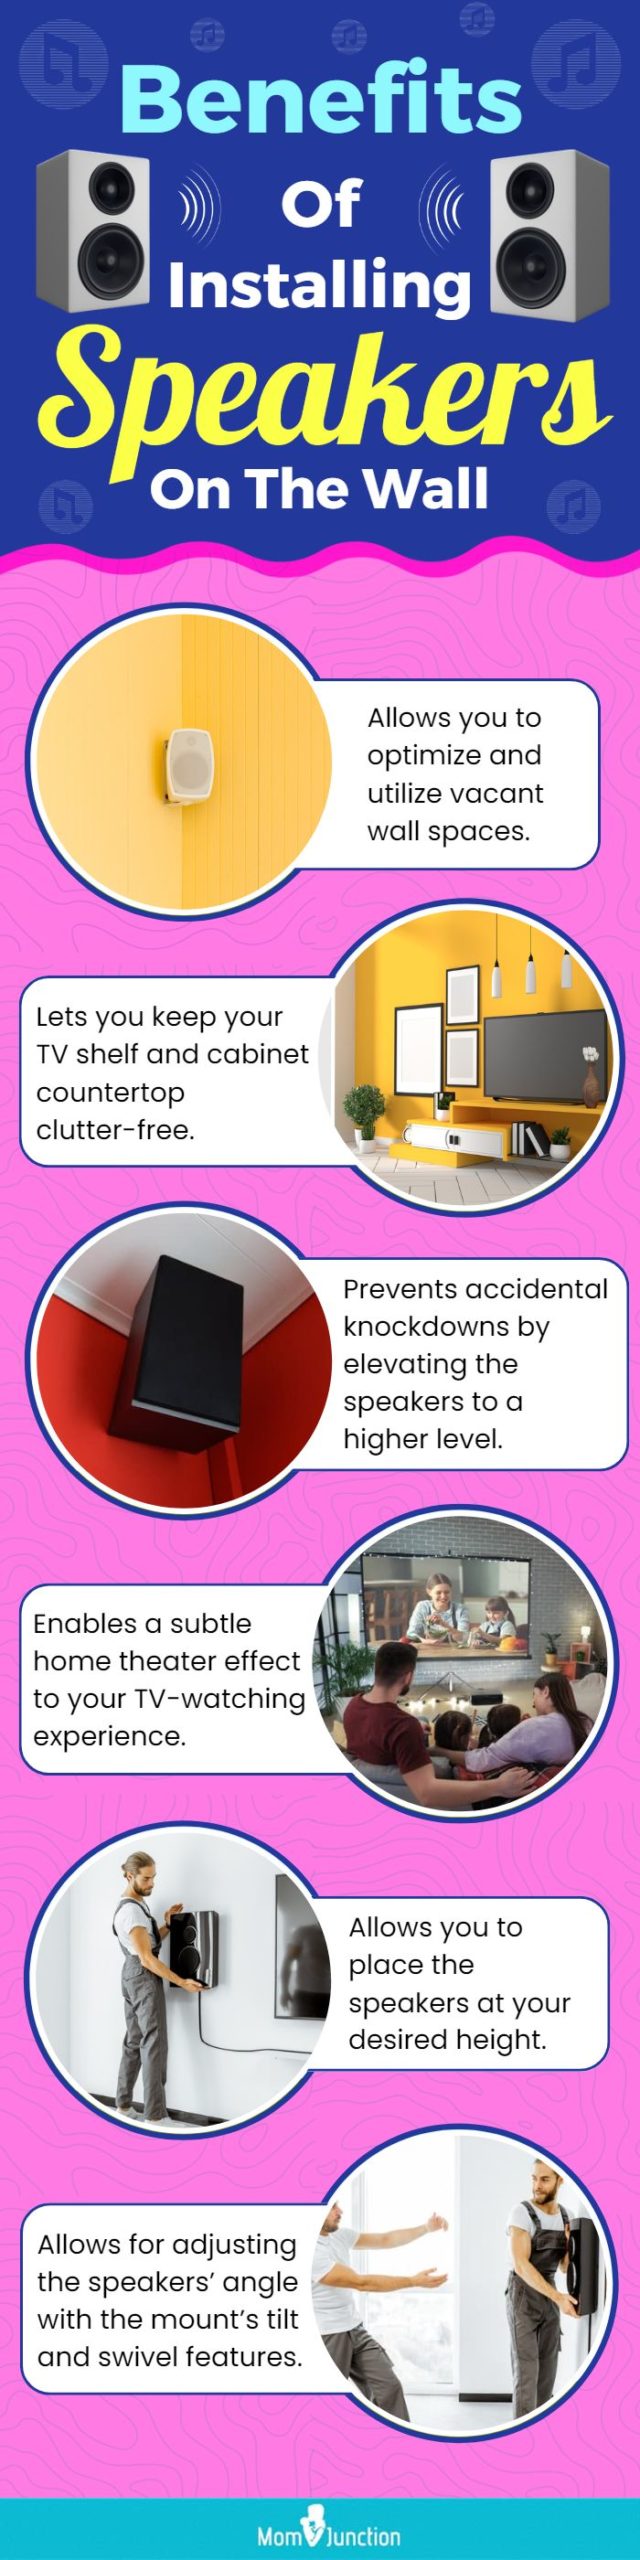 Benefits Of Installing Speakers On The Wall (infographic)